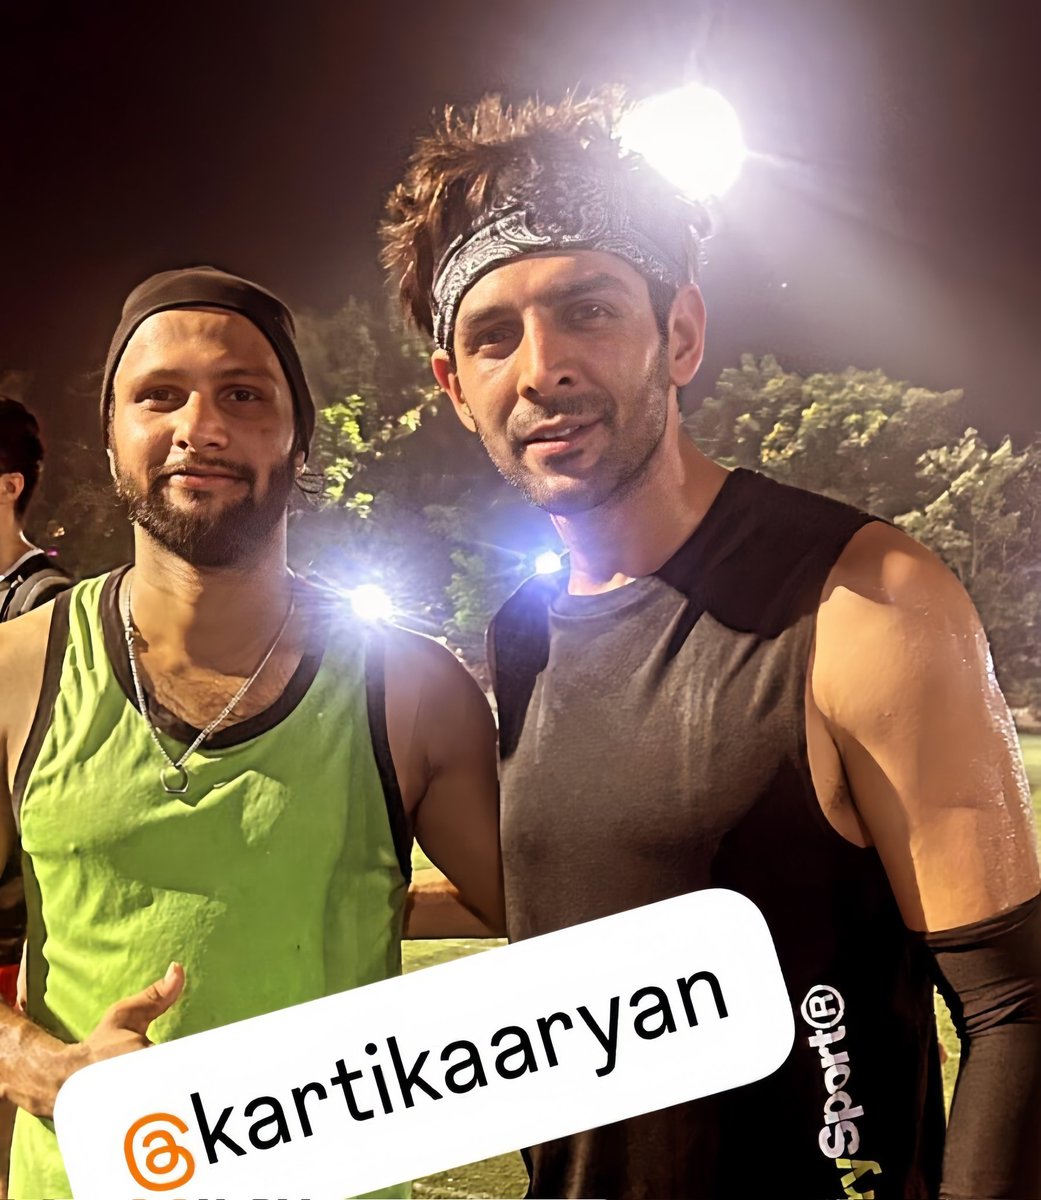 ✨ Kartik Aaryan's genuine warmth towards fans, taking time for photos, showcases his remarkable humility and love for his supporters! 🌟

 #KartikAaryan #FanLove #Bollywood